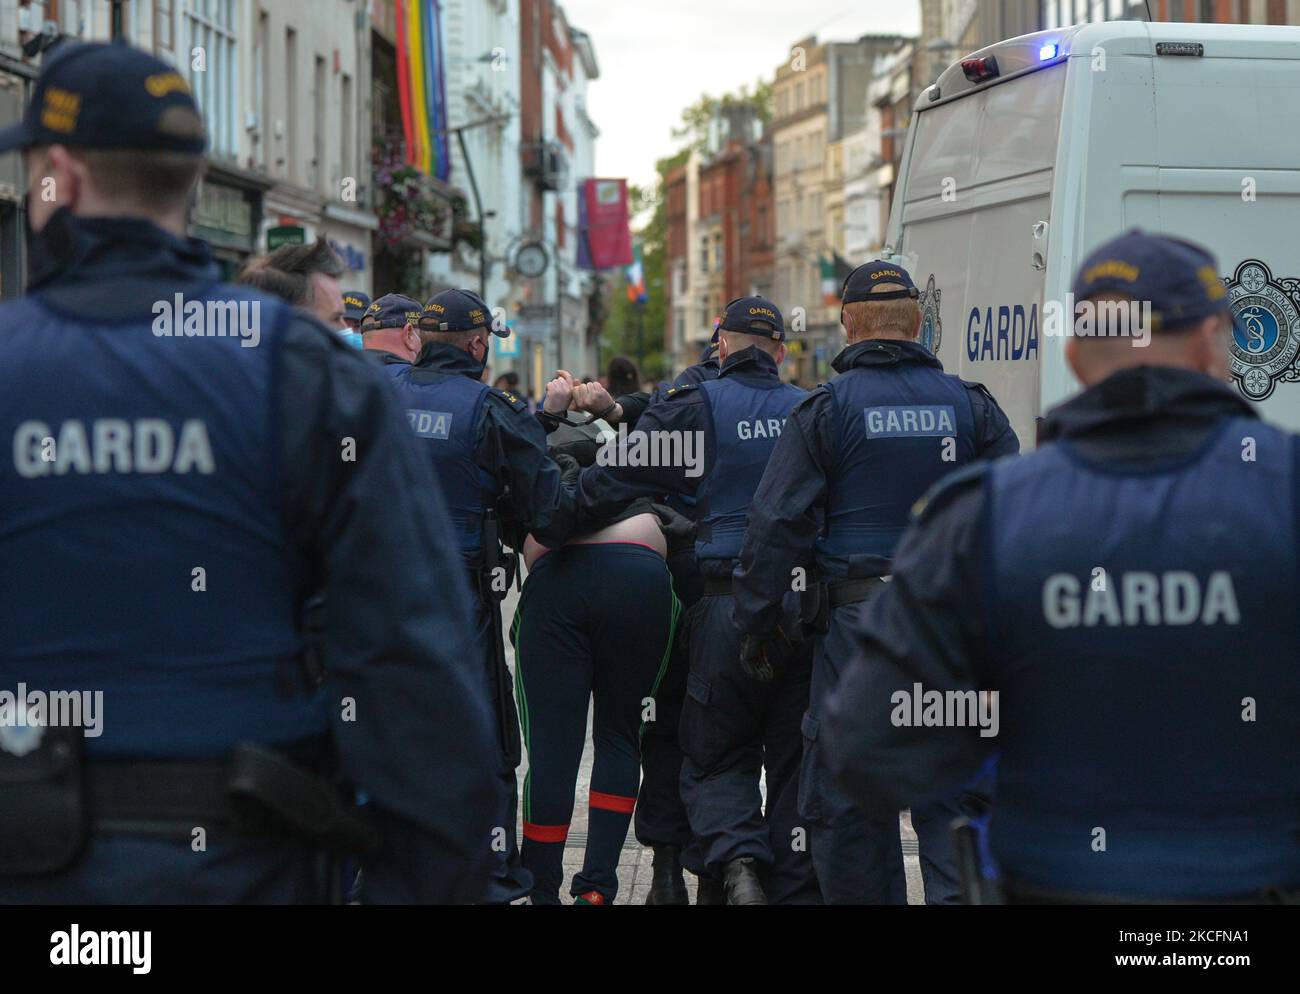 Members of Gardai arrest a young man on Grafton Street in Dublin, on Saturday evening, June 5, 2021. Nineteen people were arrested on suspicion of violating public order after another night of rioting in downtown Dublin. Glass bottles and other missiles were thrown at the gardai after they collided with large crowds in the city on Saturday night. On Sunday, 6 June 2021, in Dublin, Ireland. (Photo by Artur Widak/NurPhoto) Stock Photo